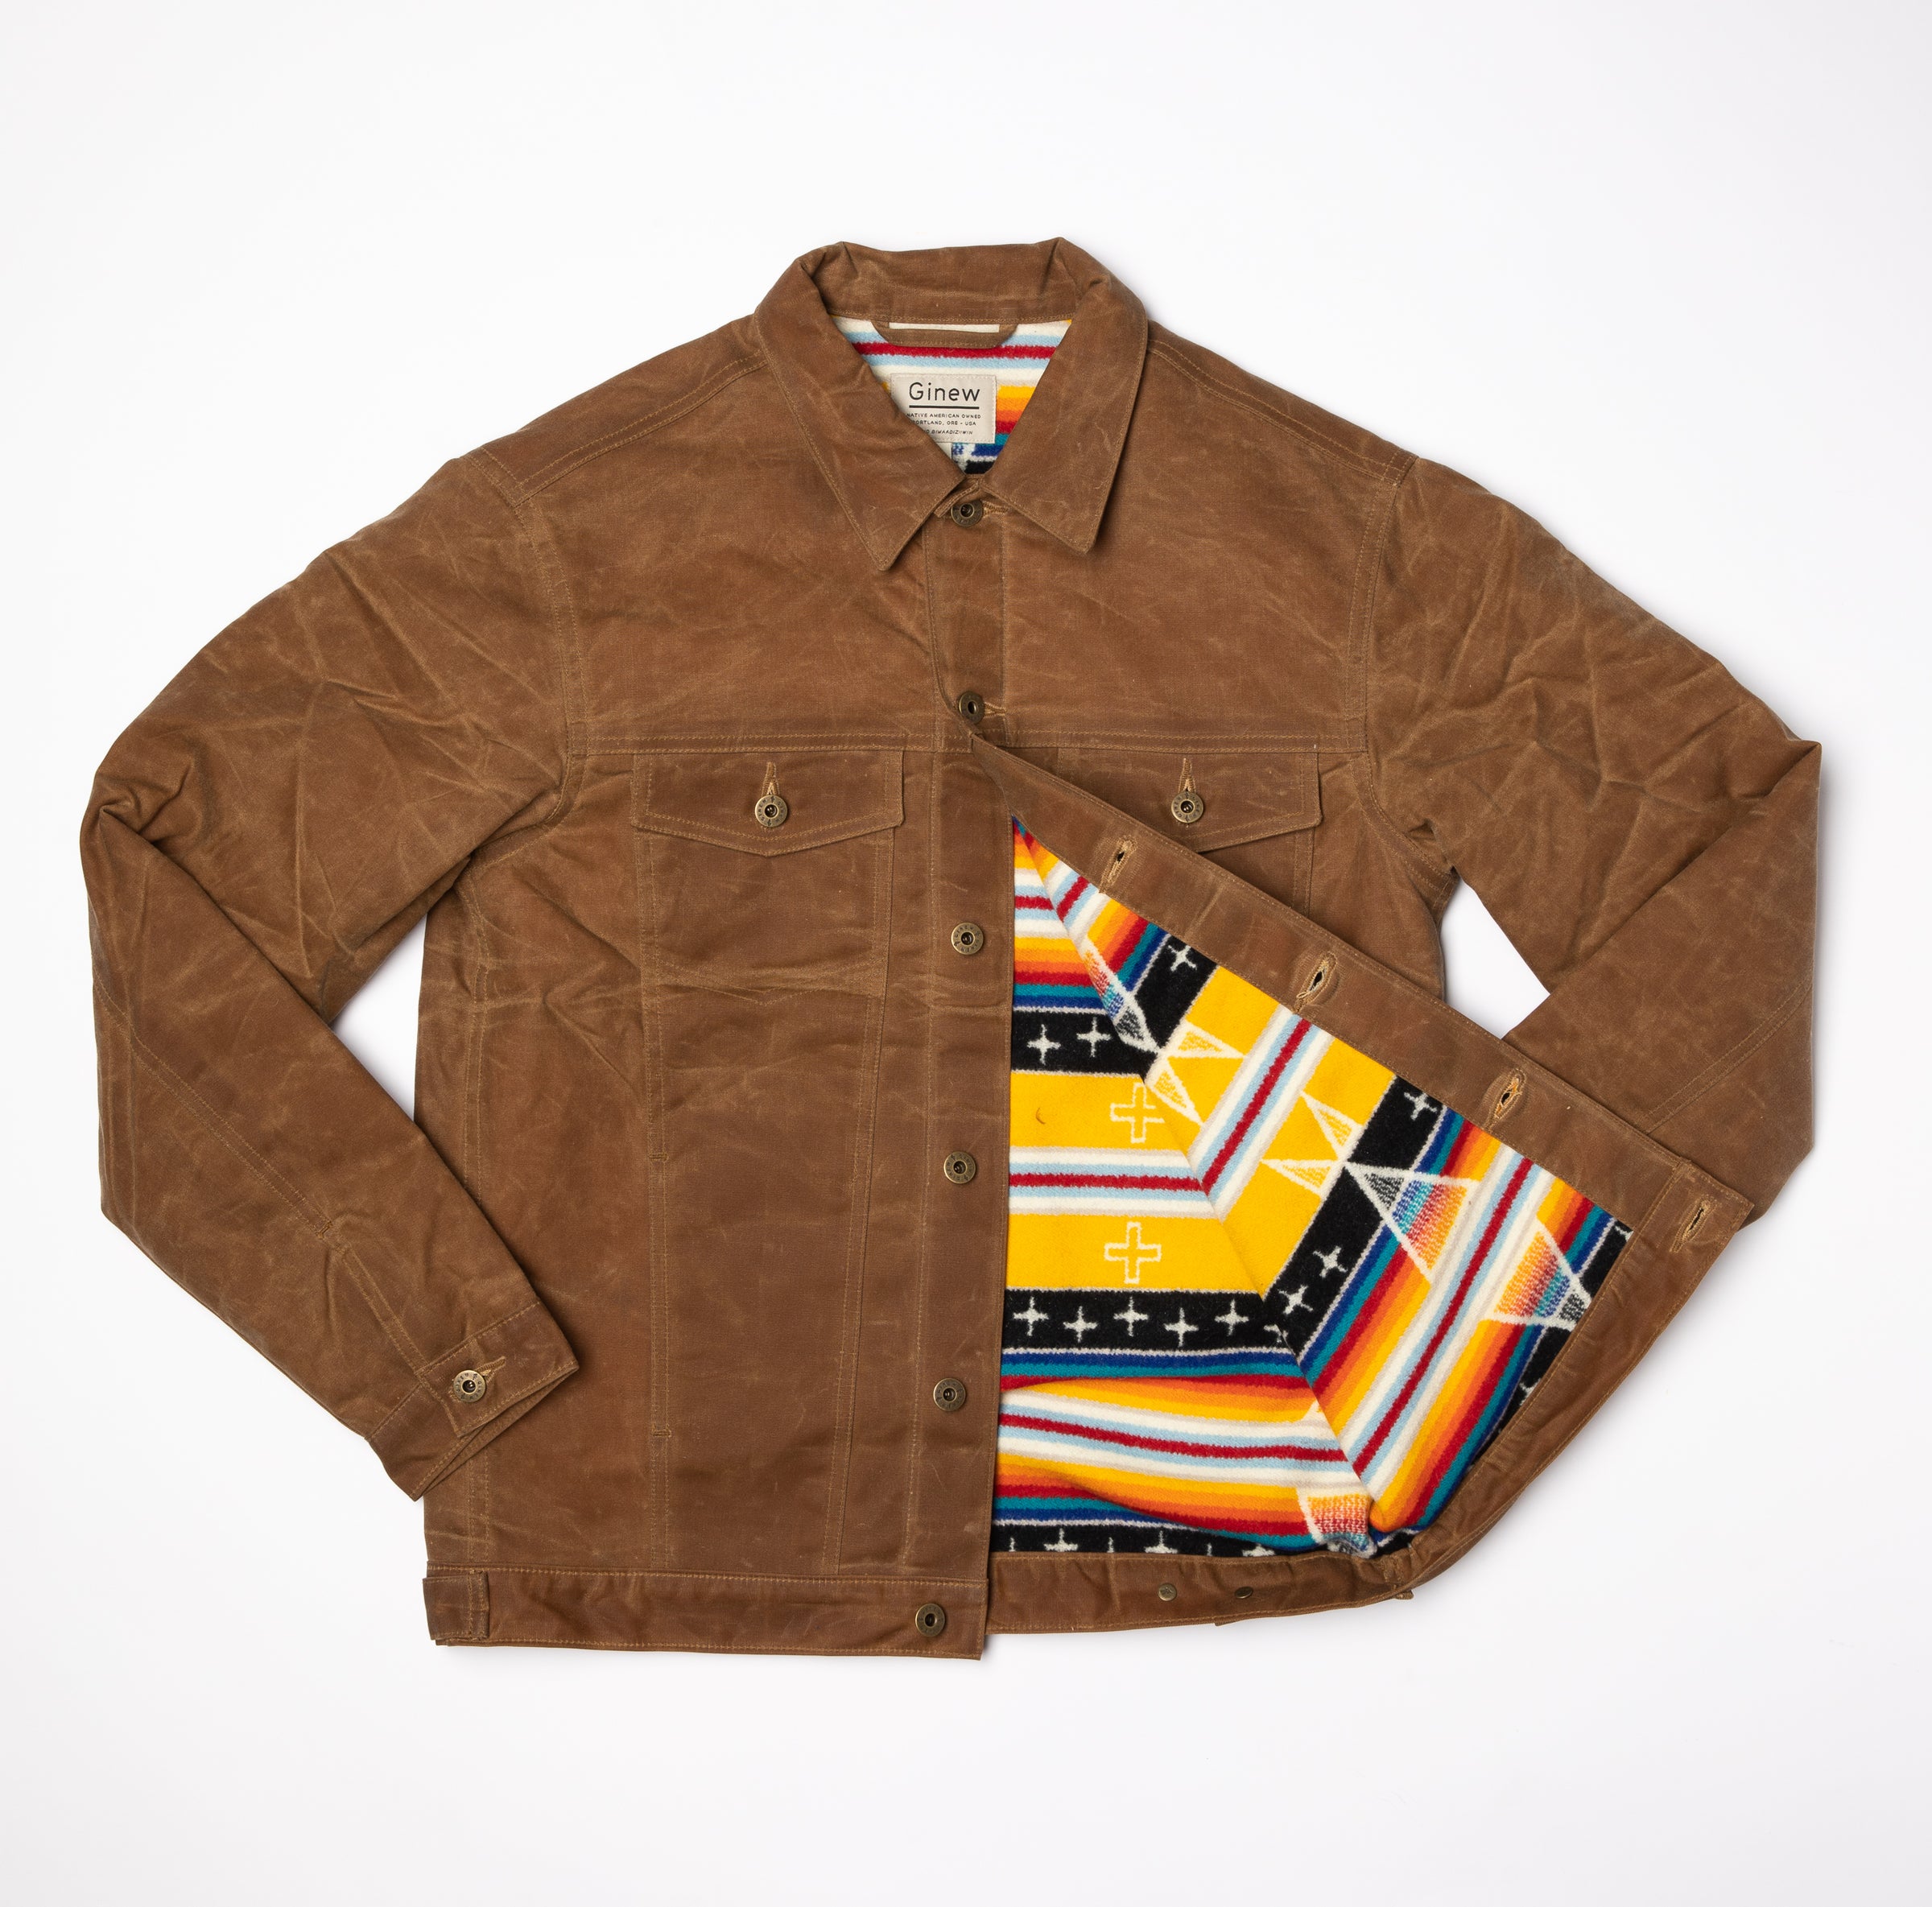 Native American Owned. Coats Made in the USA. Wax canvas, denim, Pendleton lining. 